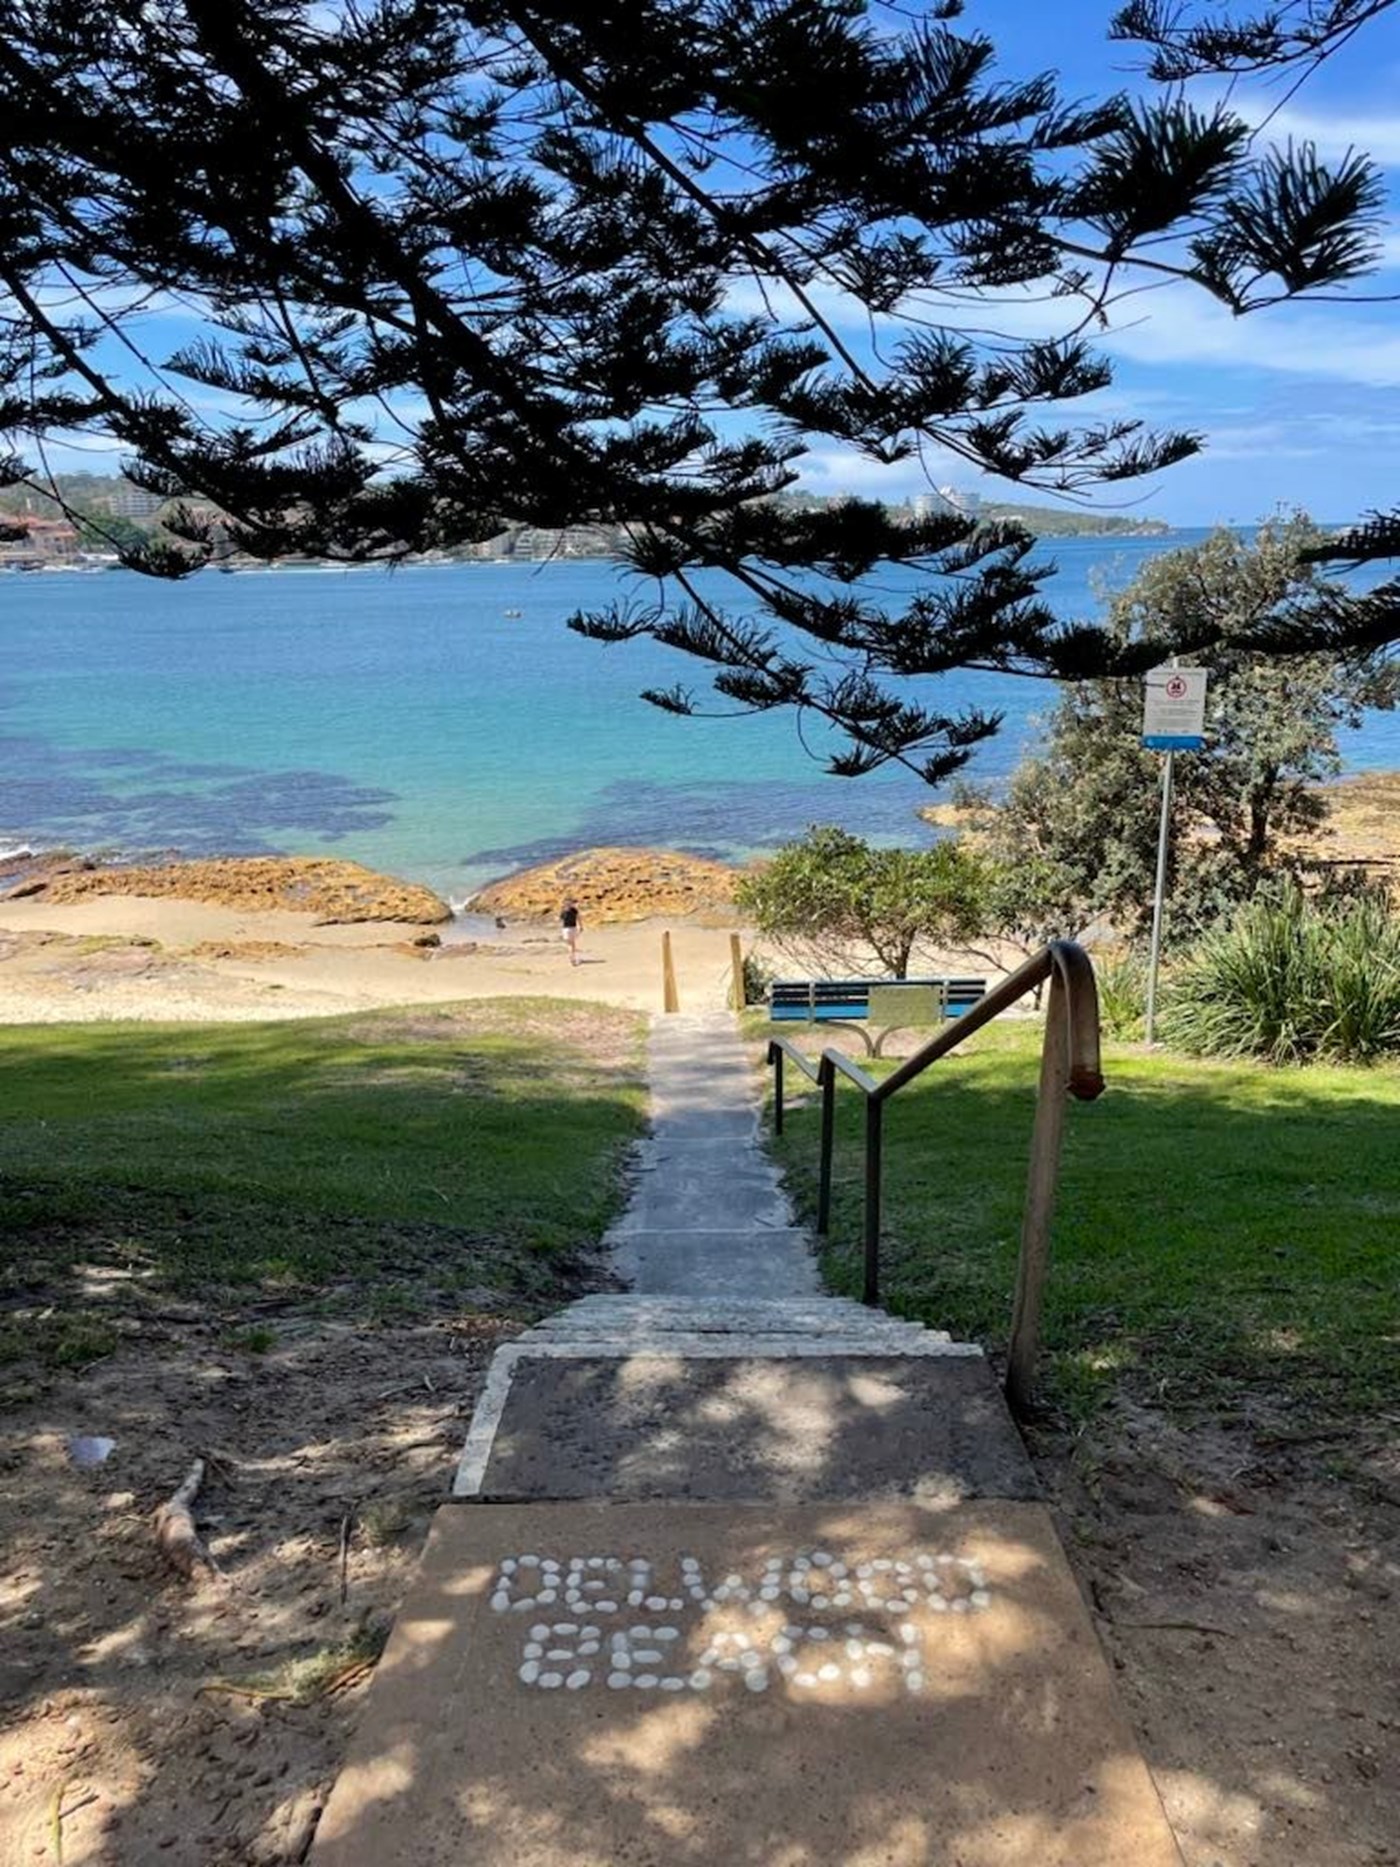 A narrow staircase snakes down to the water at Delwood Beach. At the top, the words 'Delwood Beach' are spelled out in stone.